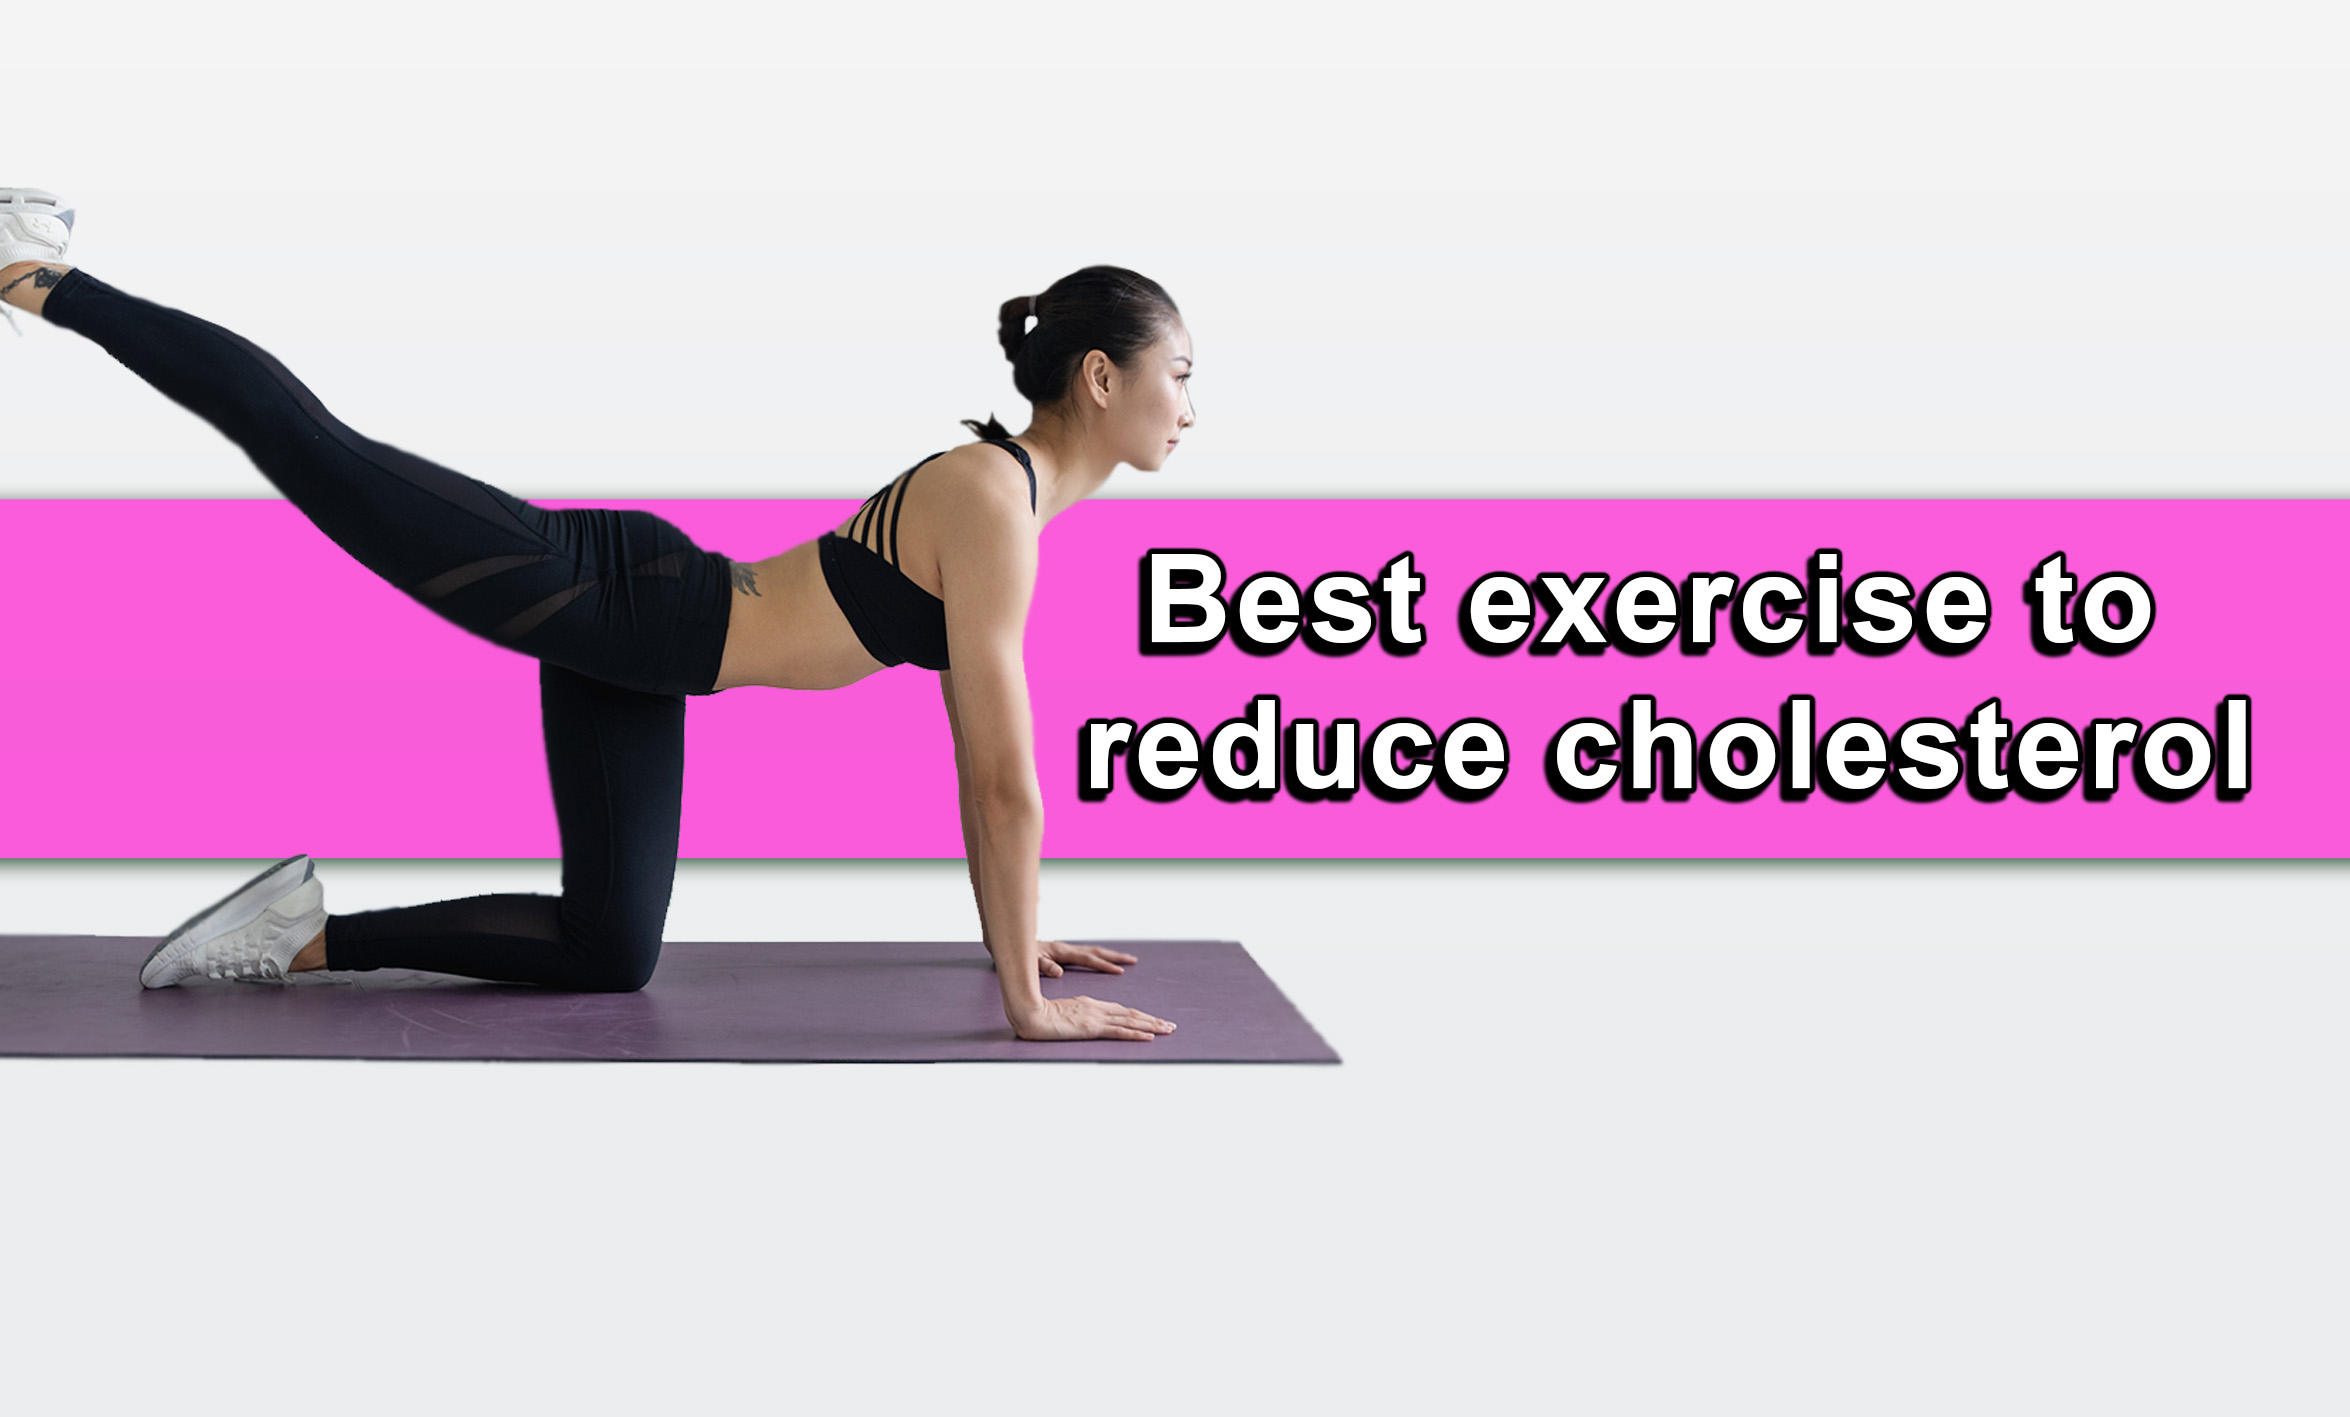 Best exercise to reduce cholesterol